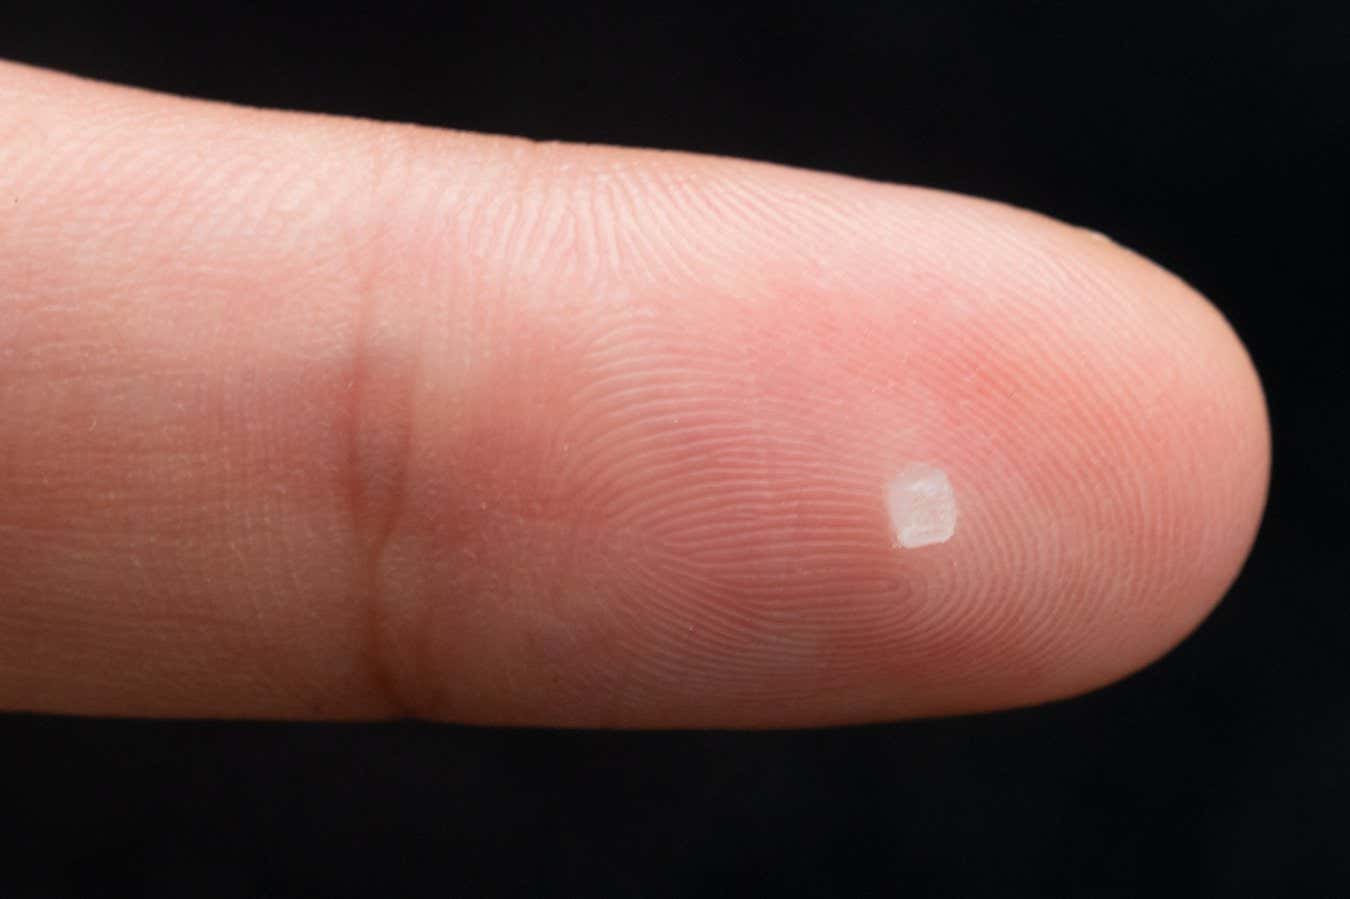 Tiny brain sensor implanted without surgery dissolves after weeks